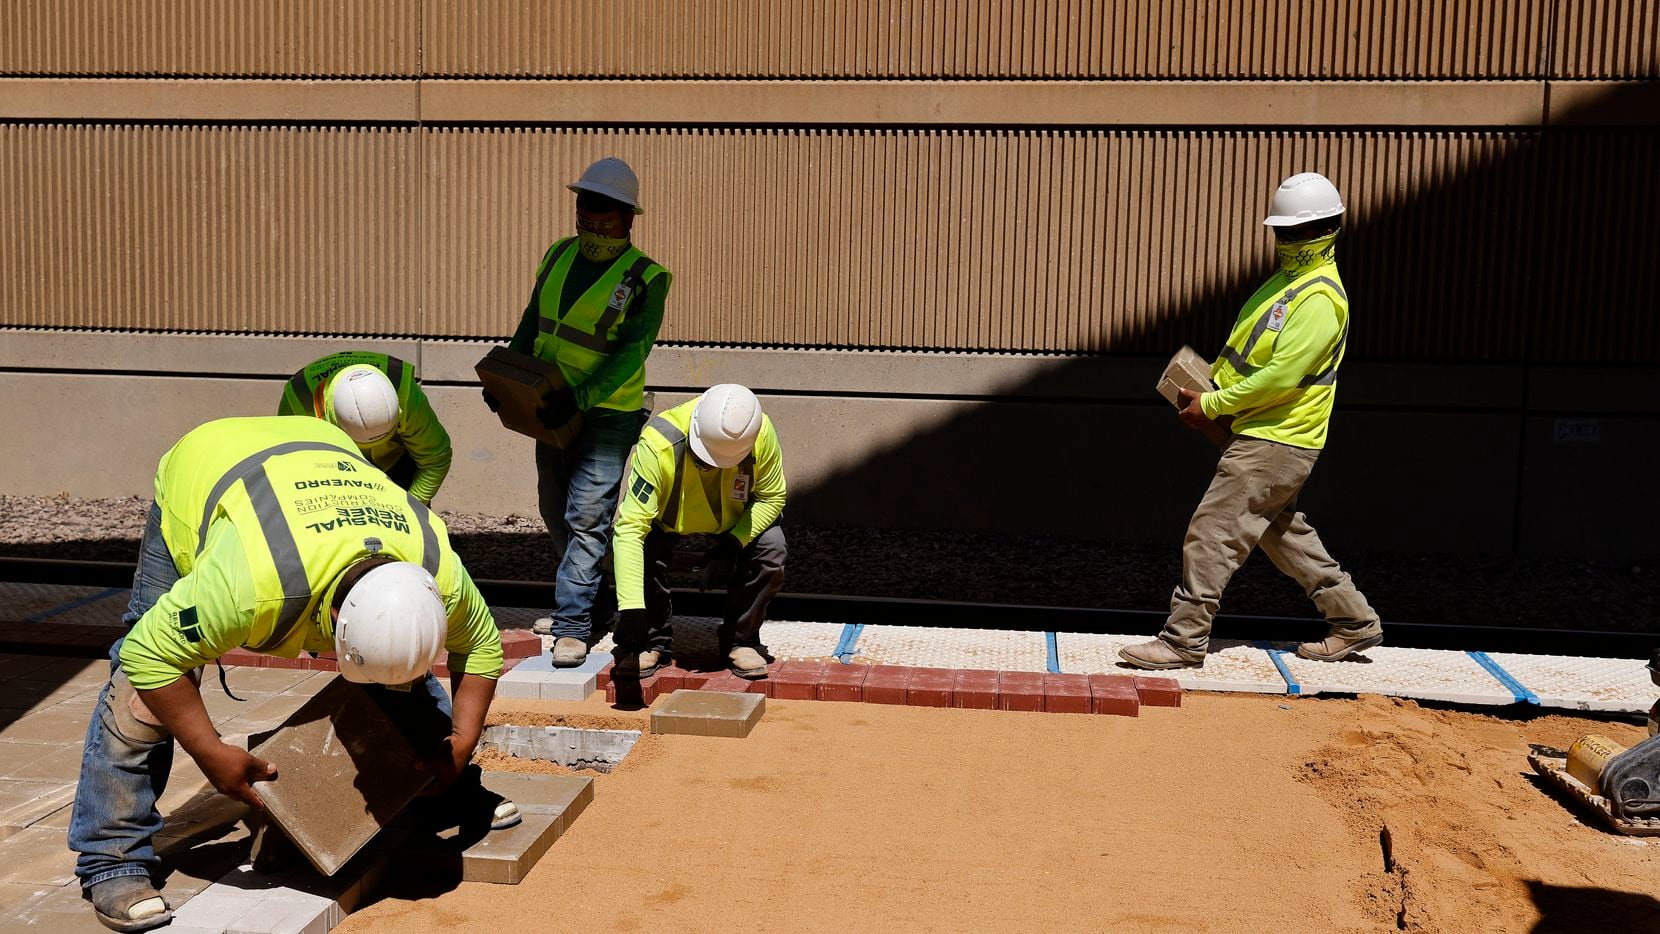 Construction workers remake the platform at DART's Mockingbird Station during U.S. Transportation Secretary Pete Buttigieg's visit to Dallas earlier this month. Scott Burns says a majority of all Americans would benefit from higher wages, even if it brings some inflation with it.